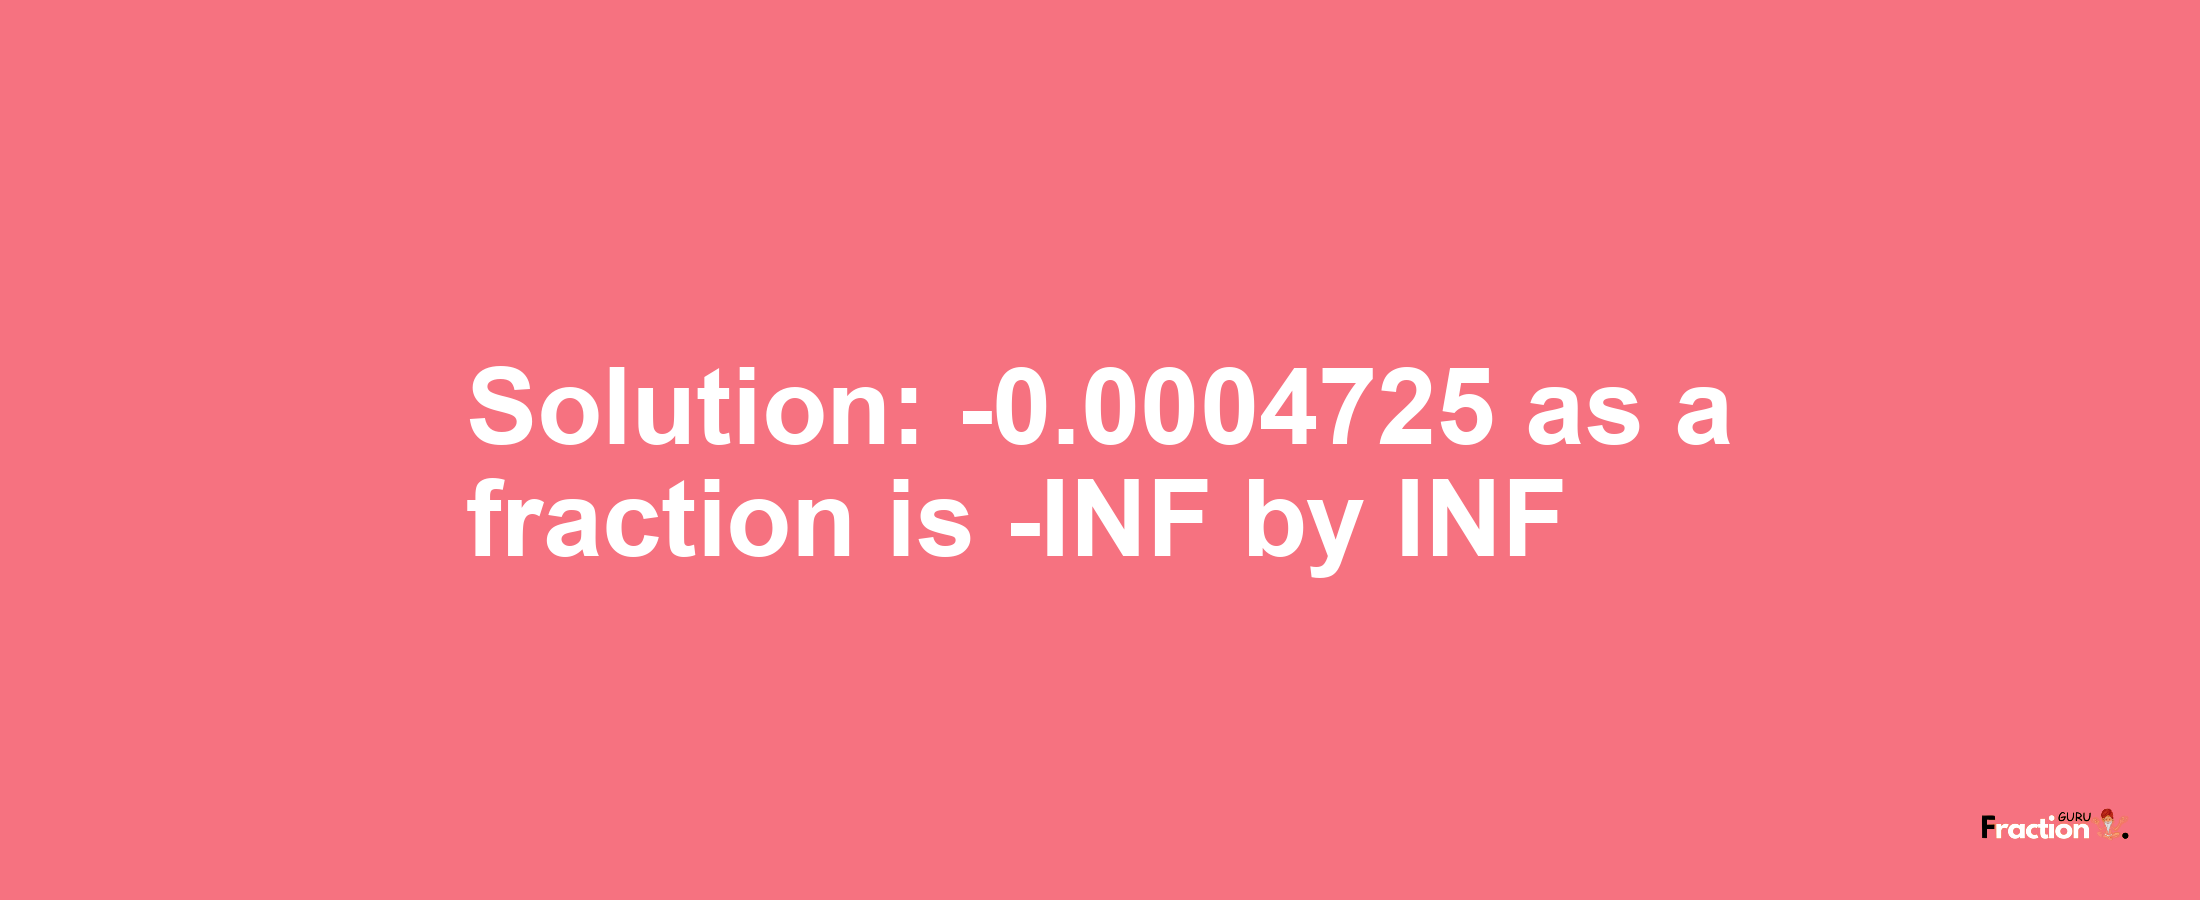 Solution:-0.0004725 as a fraction is -INF/INF